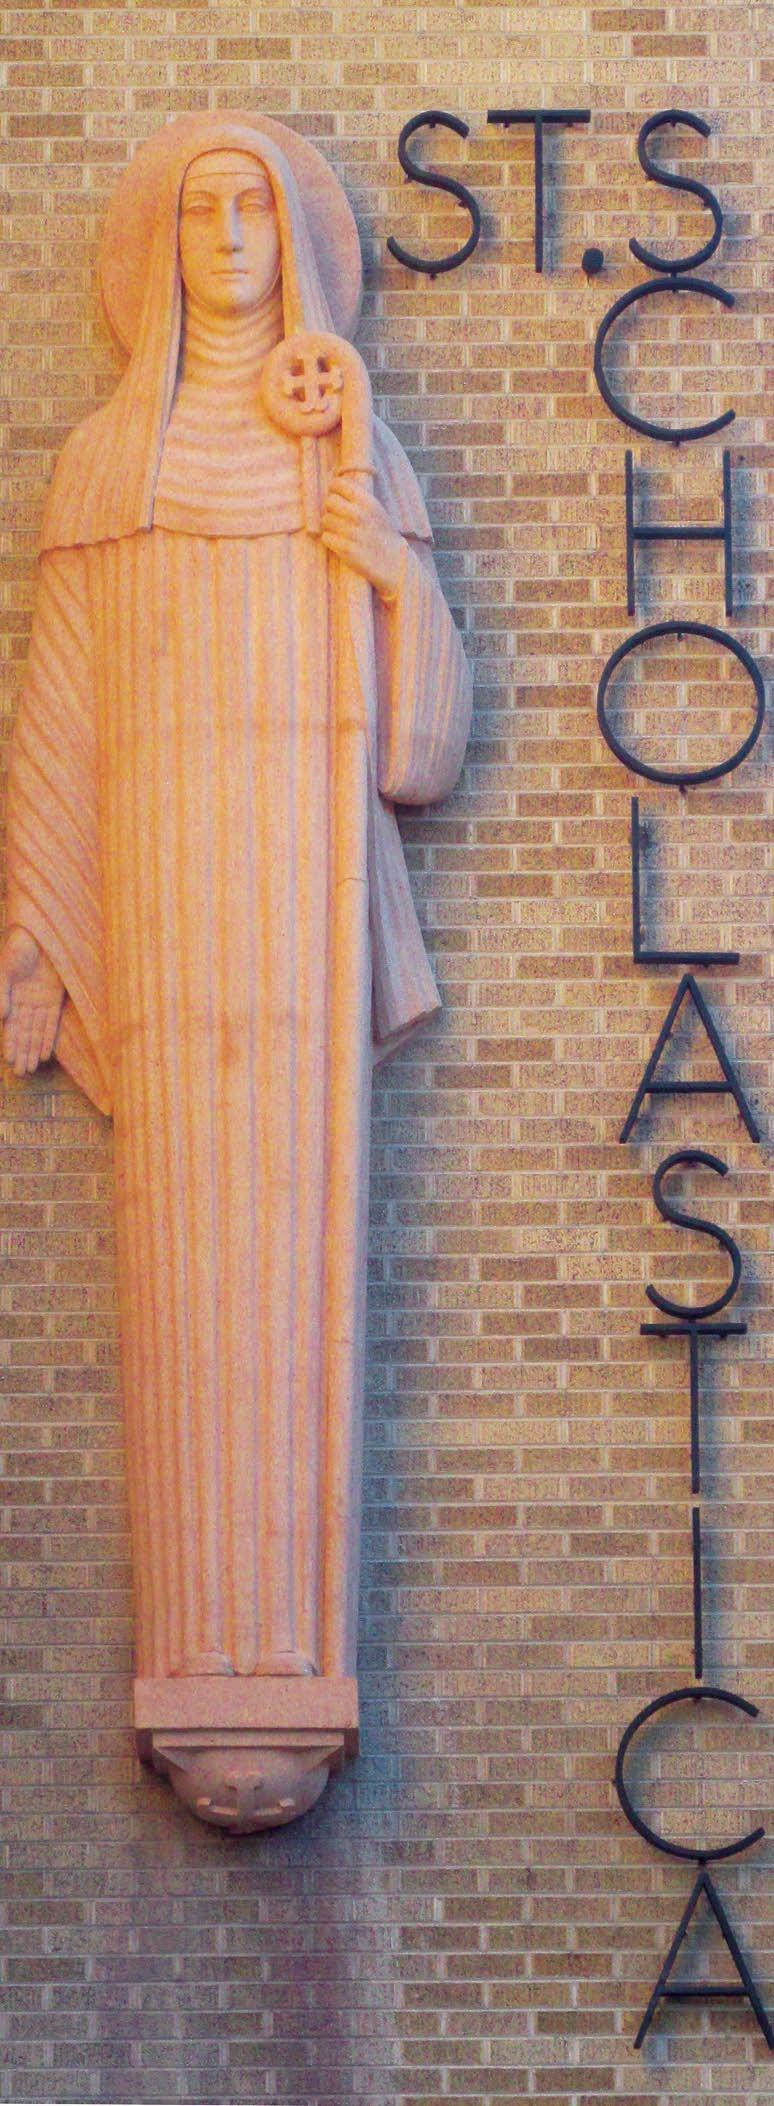 Scholastica s statue, removed when Trinity Junior High School built its athletic center in 2002, was remounted on the school building on November 12.